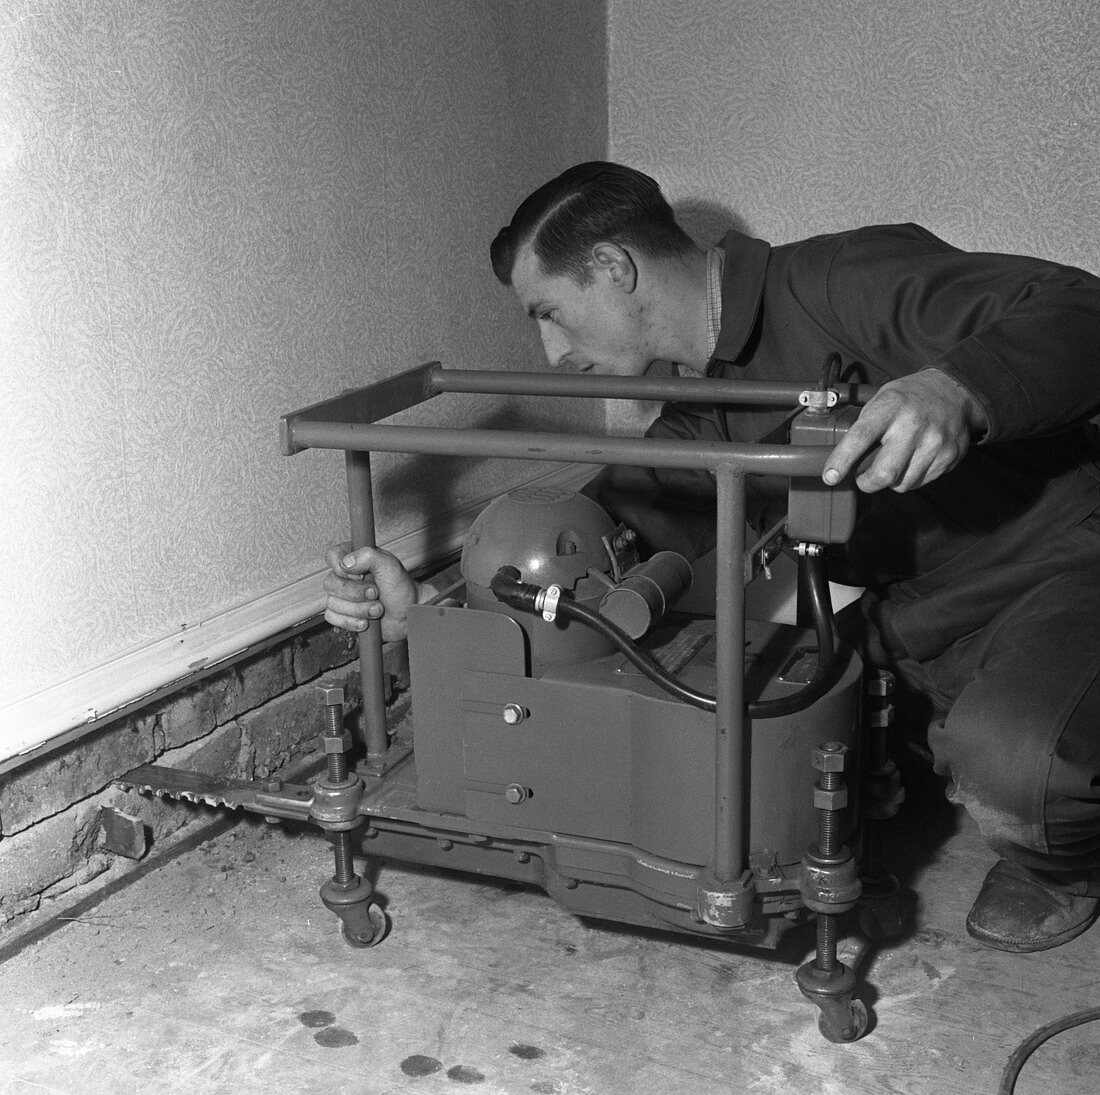 Installing a damp proof course in a house, 1957